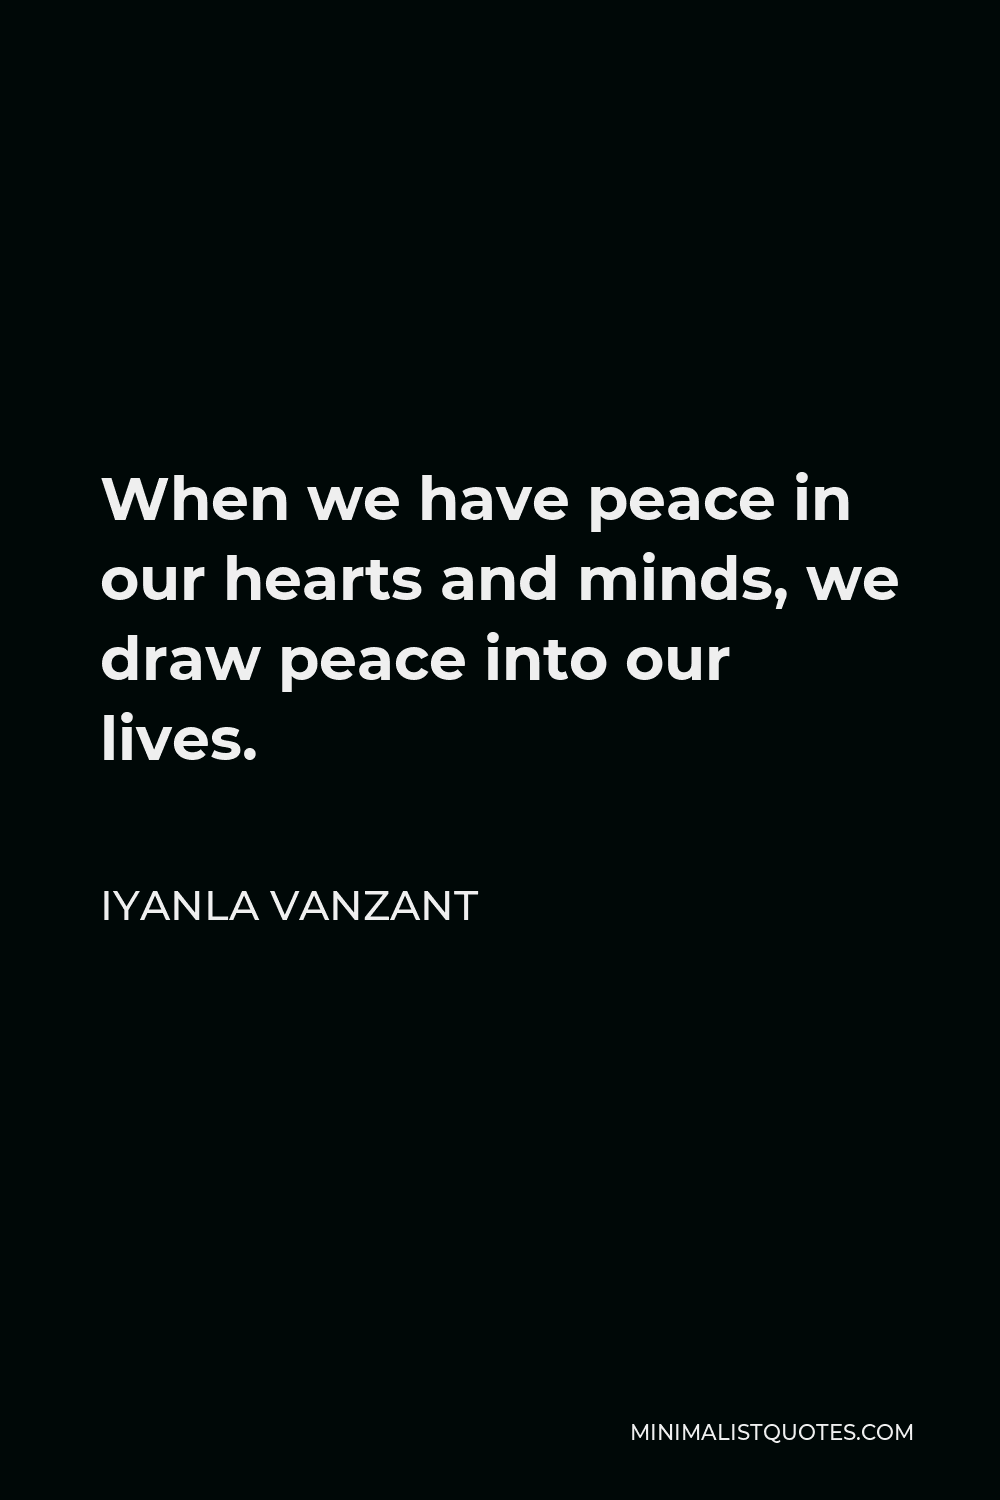 Iyanla Vanzant Quote - When we have peace in our hearts and minds, we draw peace into our lives.